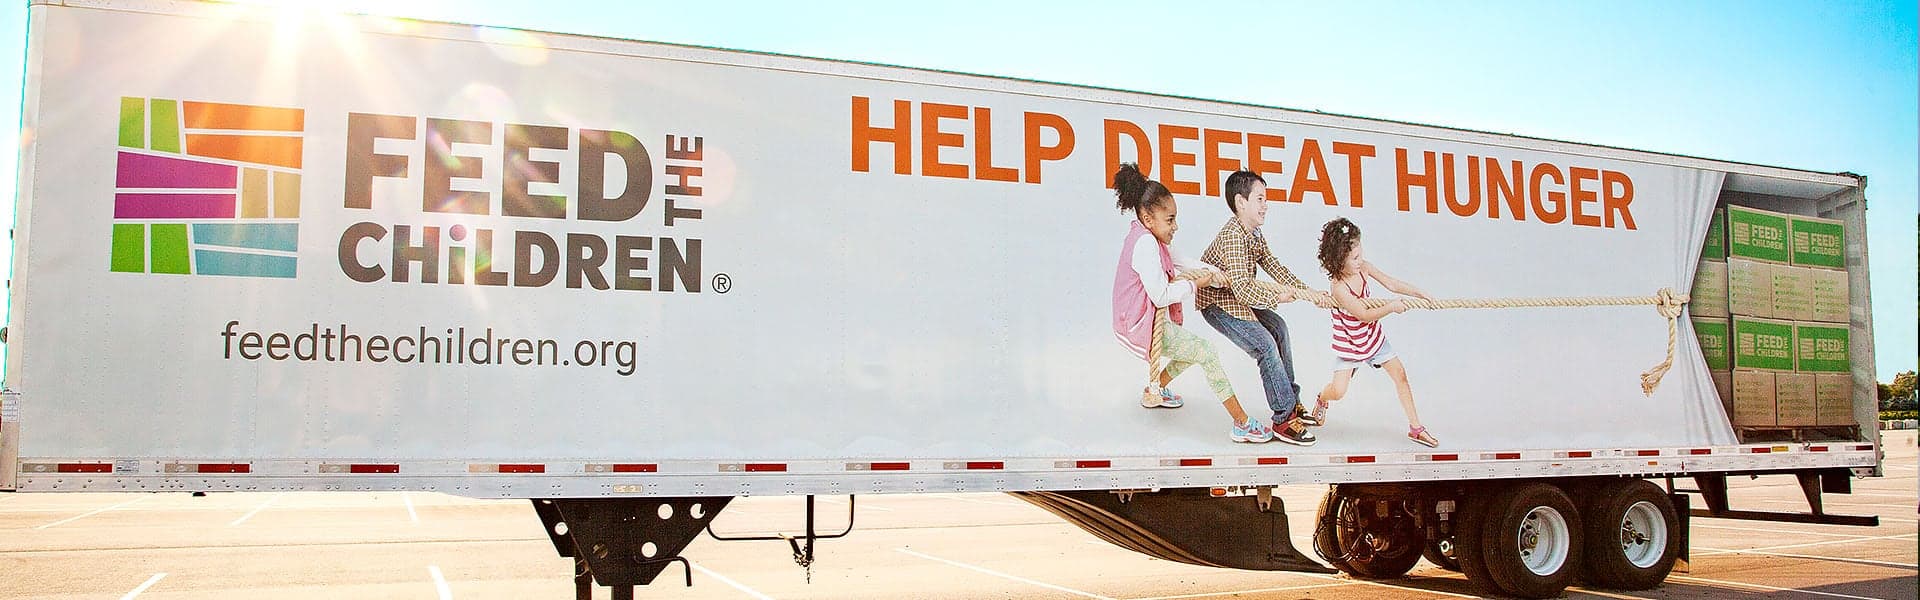 A Feed the Children semi trailer outdoors at an event